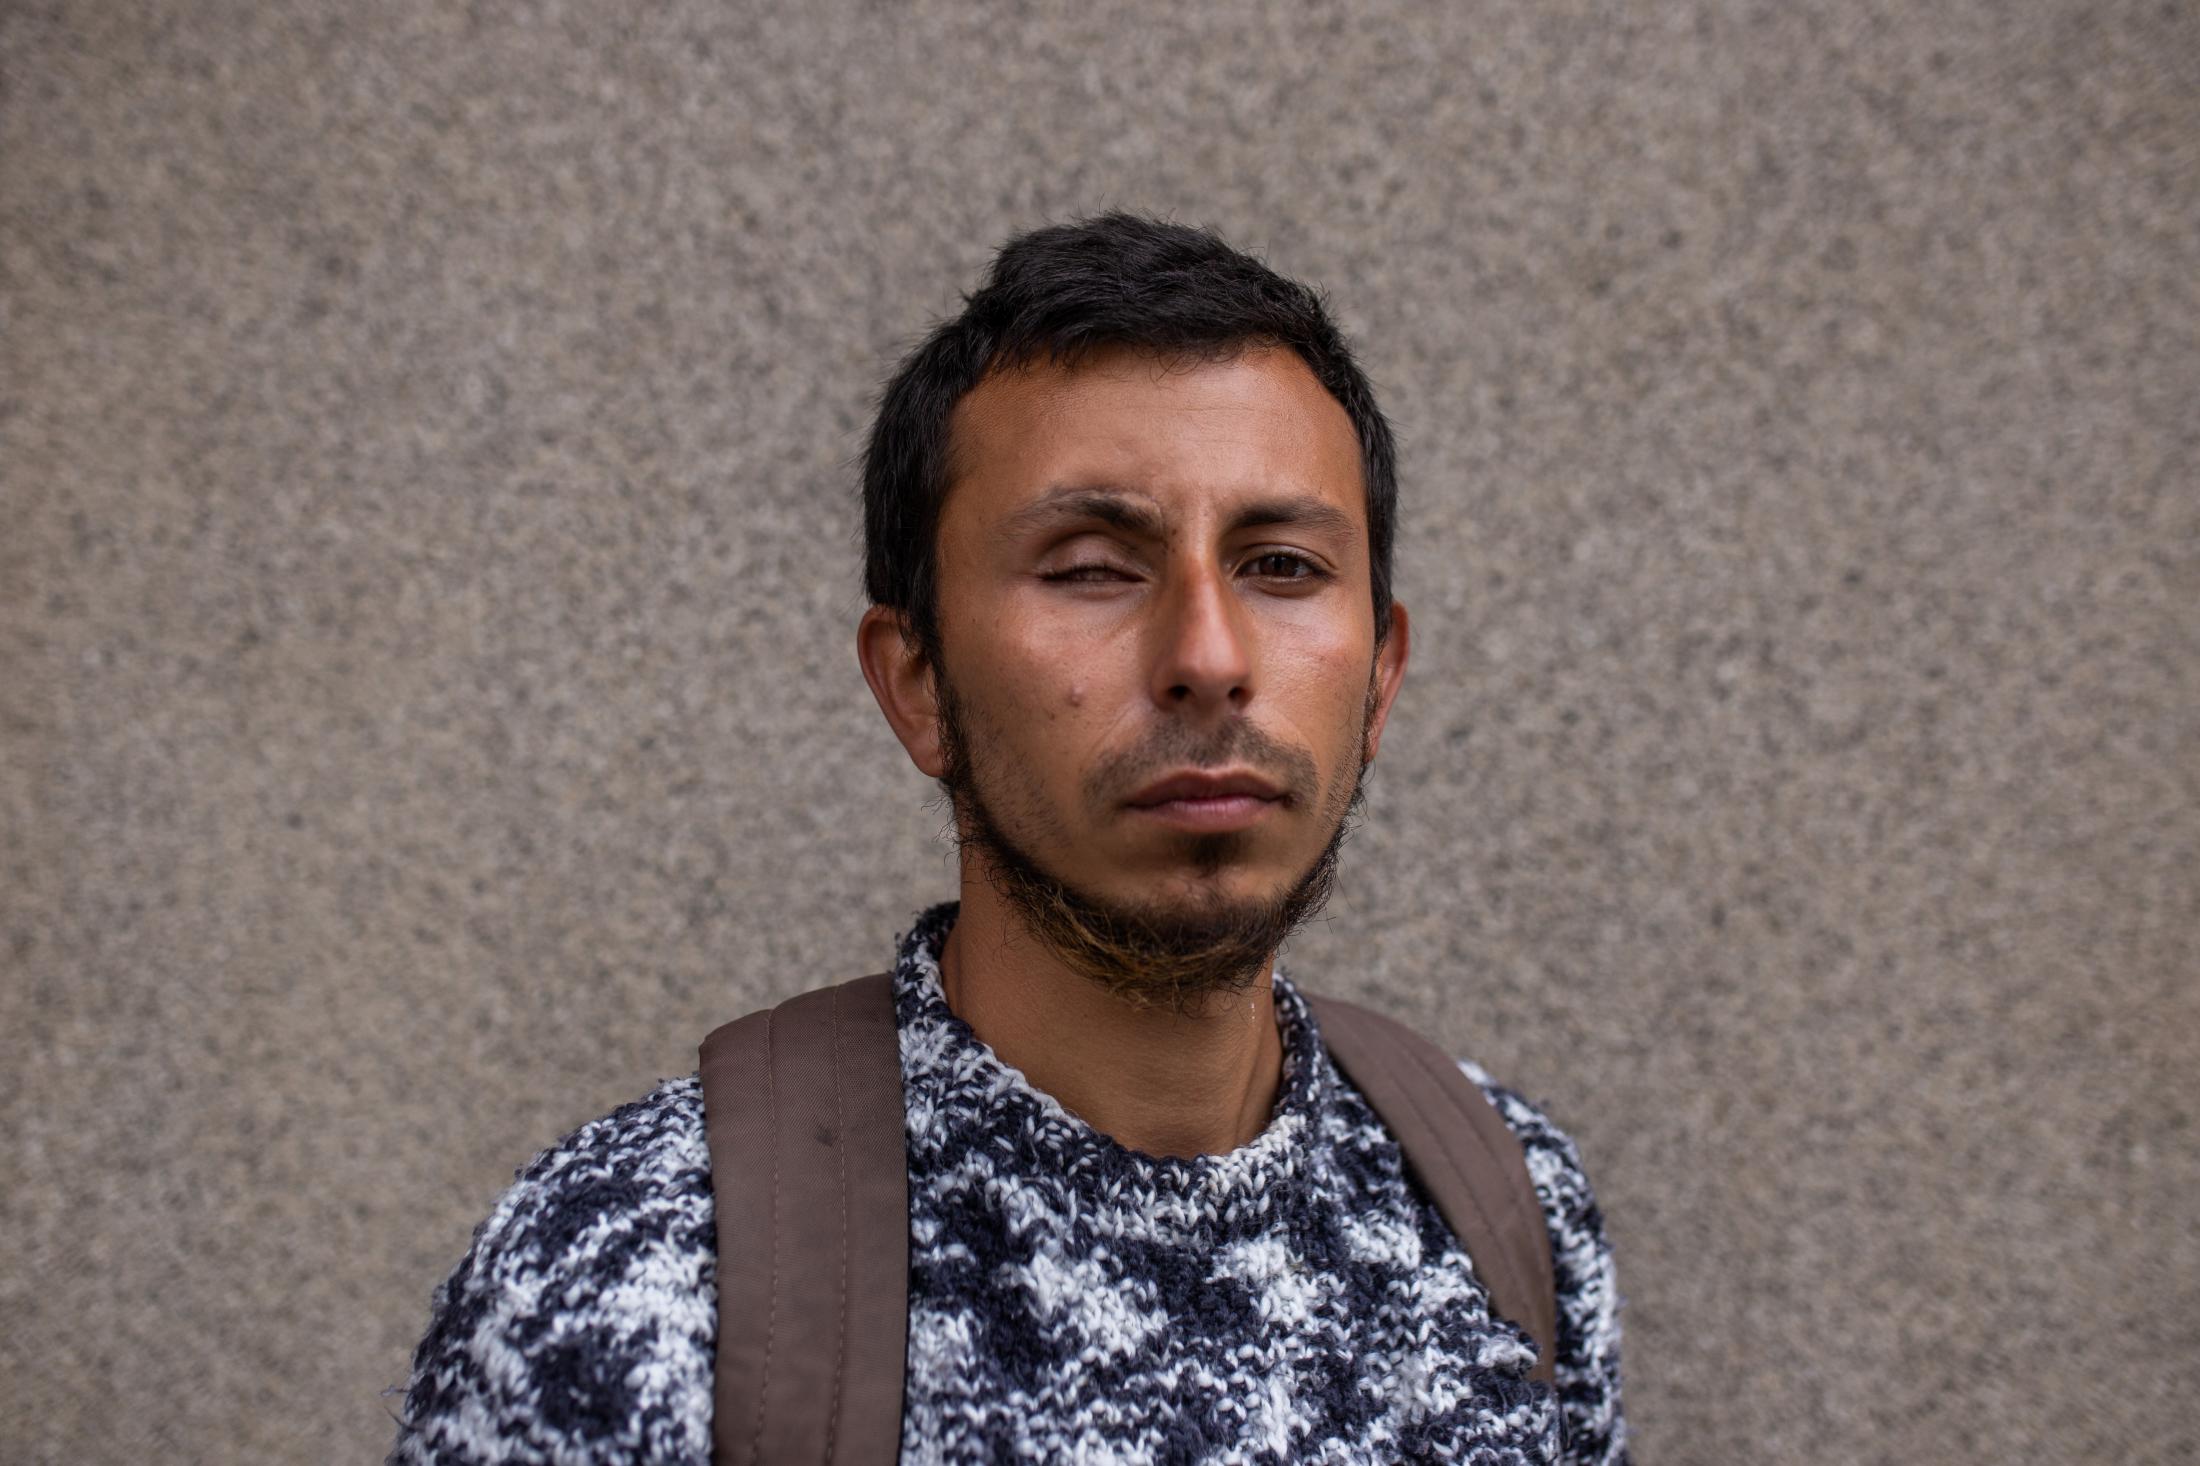 October 16, 2020. Mat&iacute;as Orellana, a victim of eye trauma, poses for a portrait during a protest to demand justice for his assault. Mat&iacute;as lost his right eye in the early morning of January 1, 2020 in Valpara&iacute;so due to a tear gas shot by the Carabineros, also causing a fracture to his skull. He is one of the more than 400 victims of eye trauma and has not yet found justice or reparation for his attack. Valparaiso, Chile